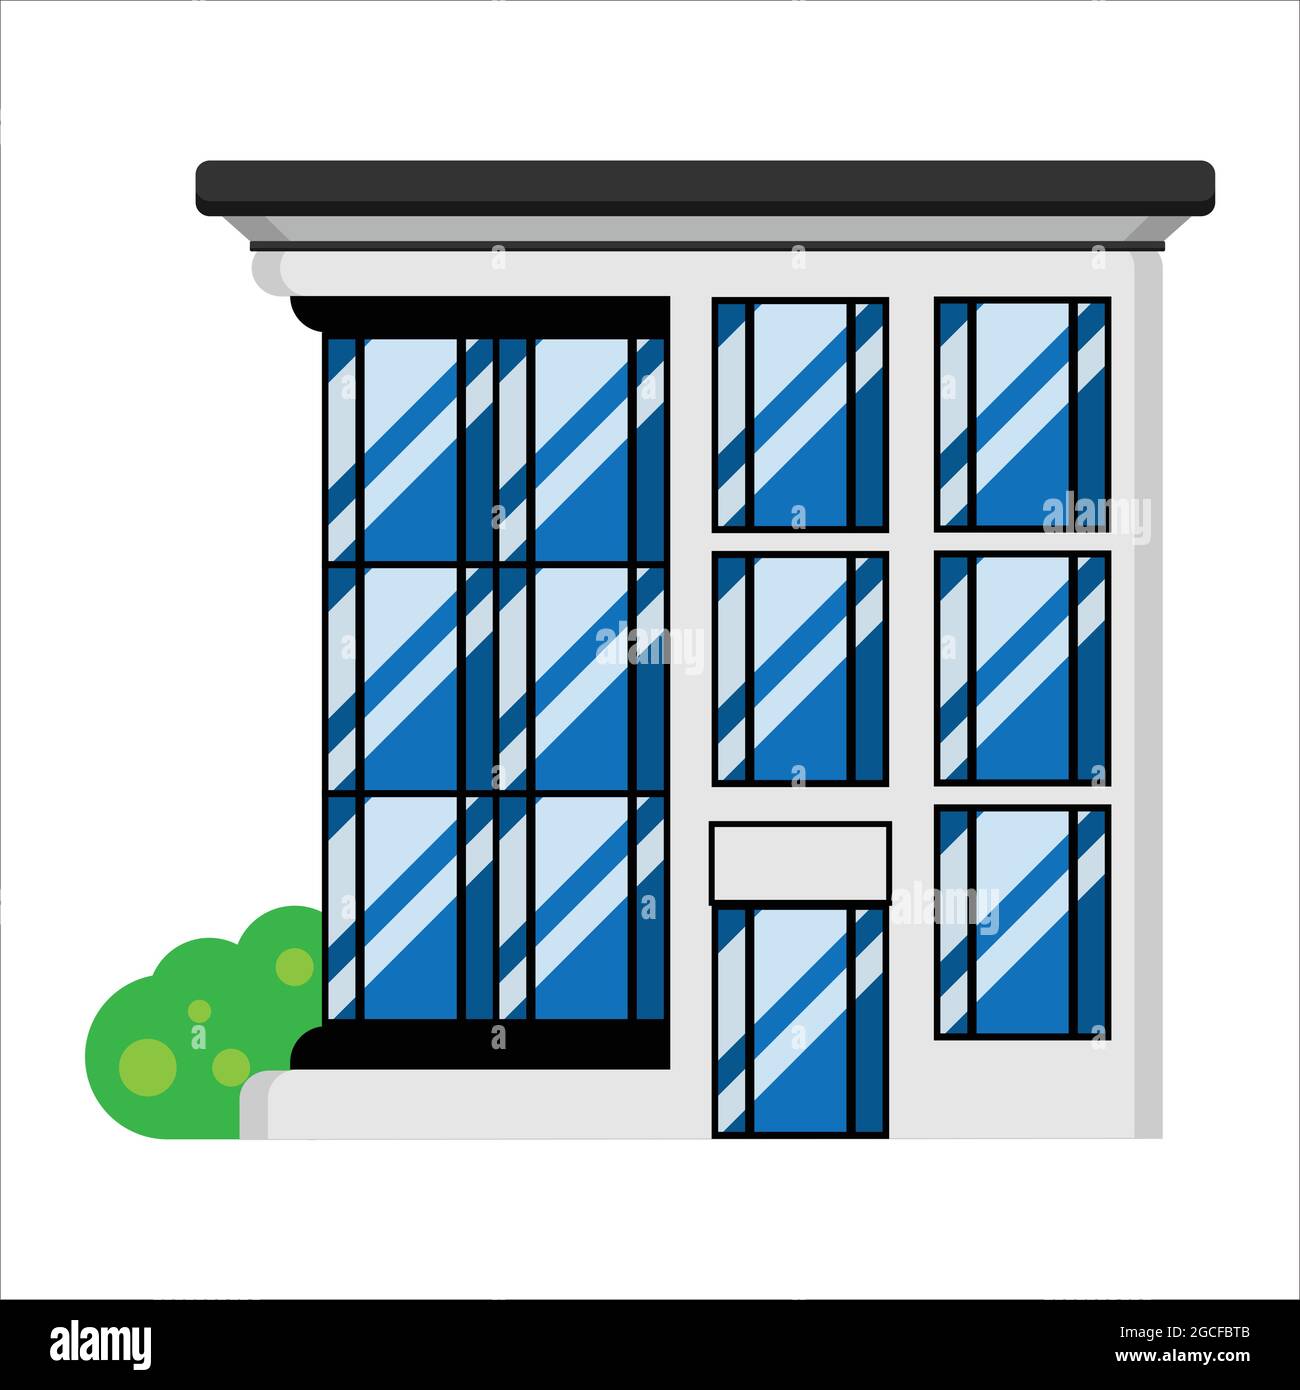 Modern City Building Facade vector illustration. Flat style office or hotel building exterior isolated on white background. Stock Vector